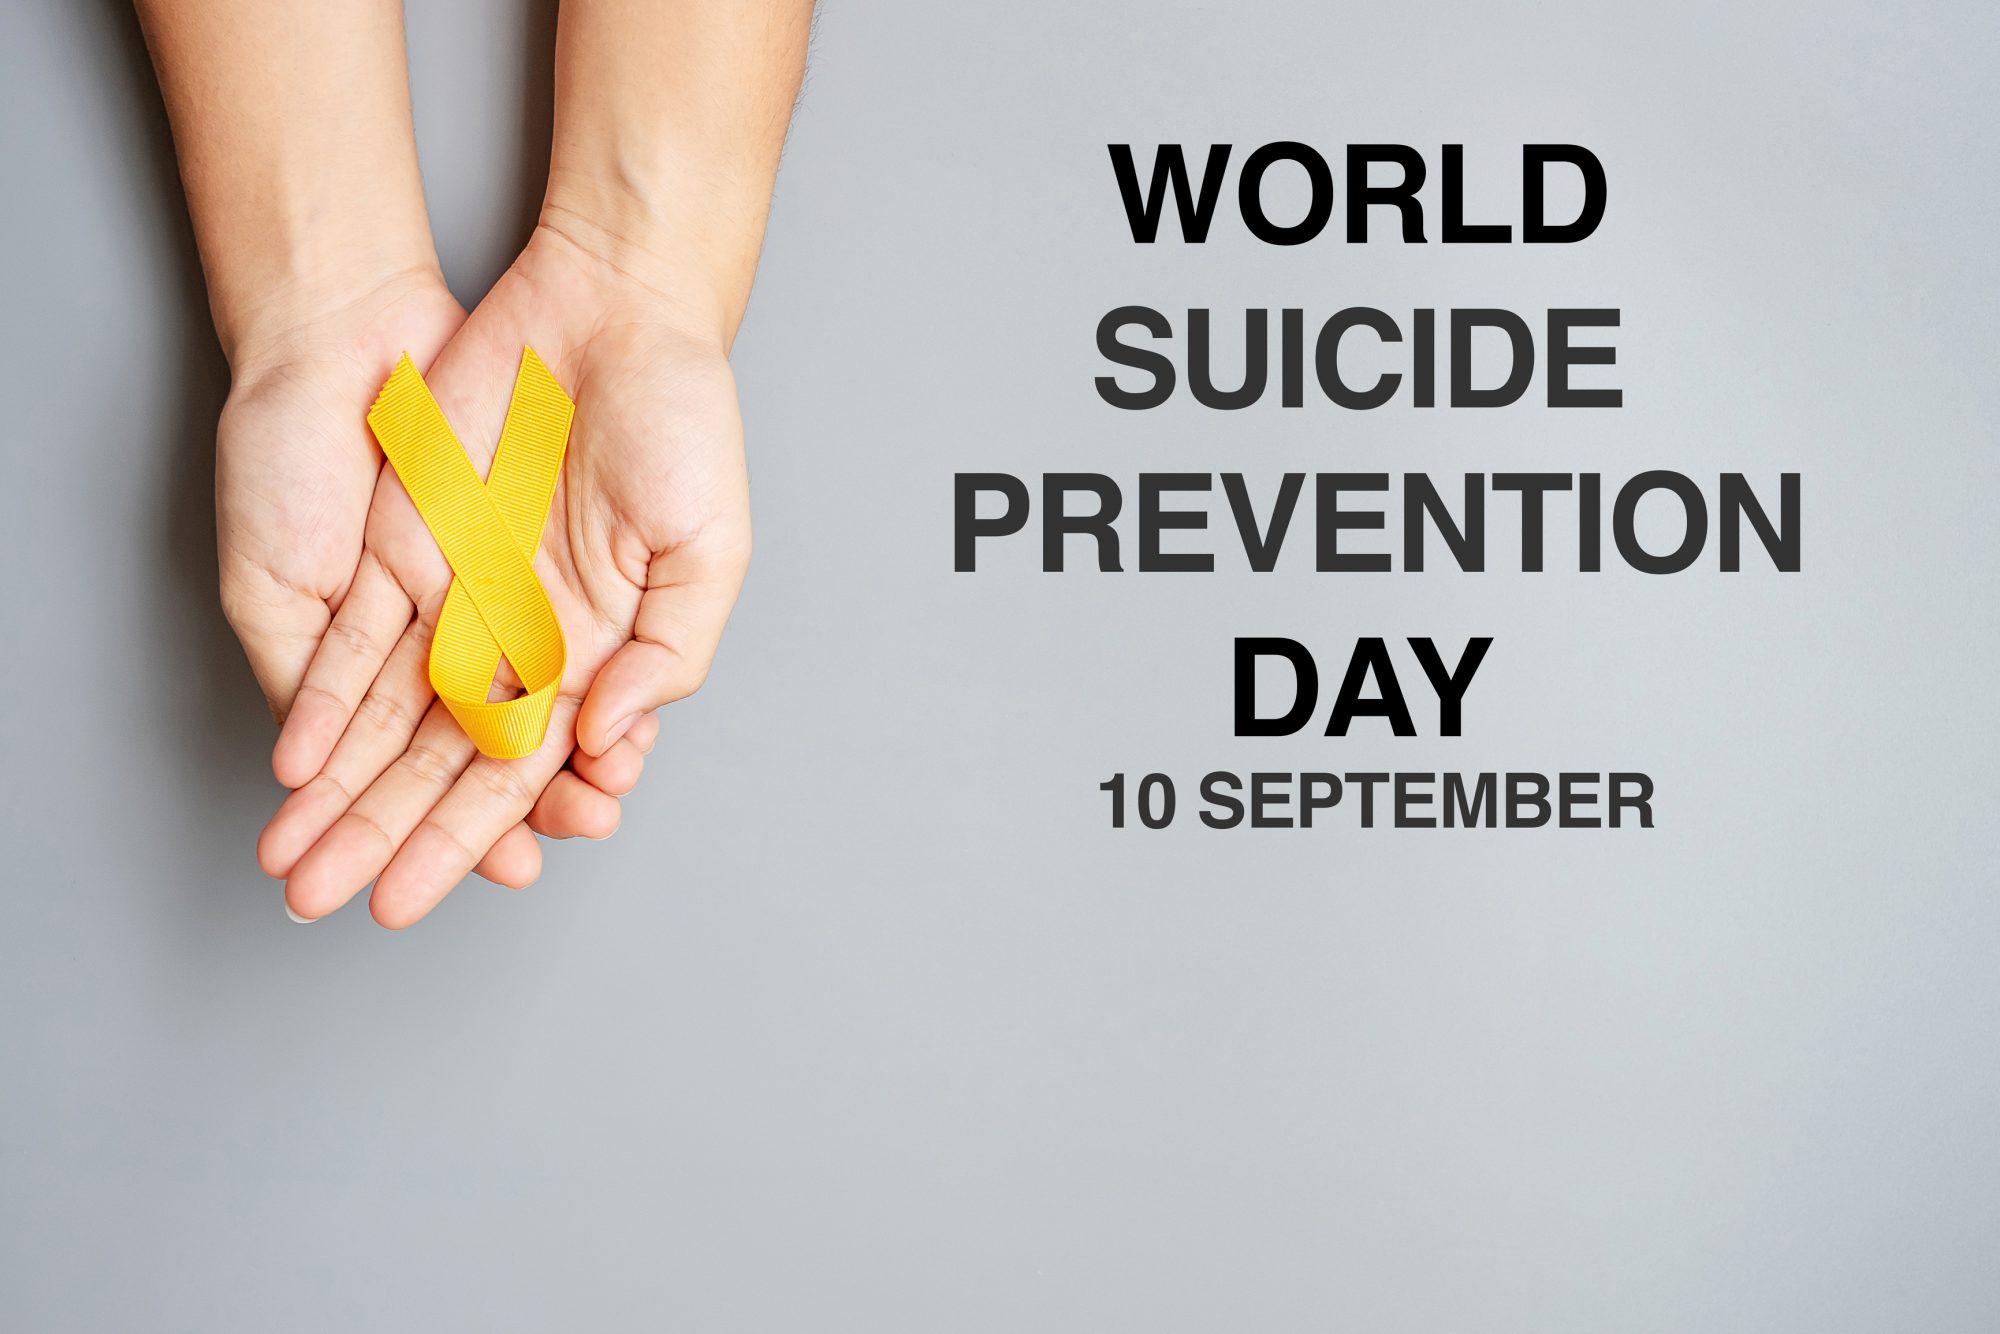 World Suicide Prevention Day will be observed on Friday 10th September 2021...